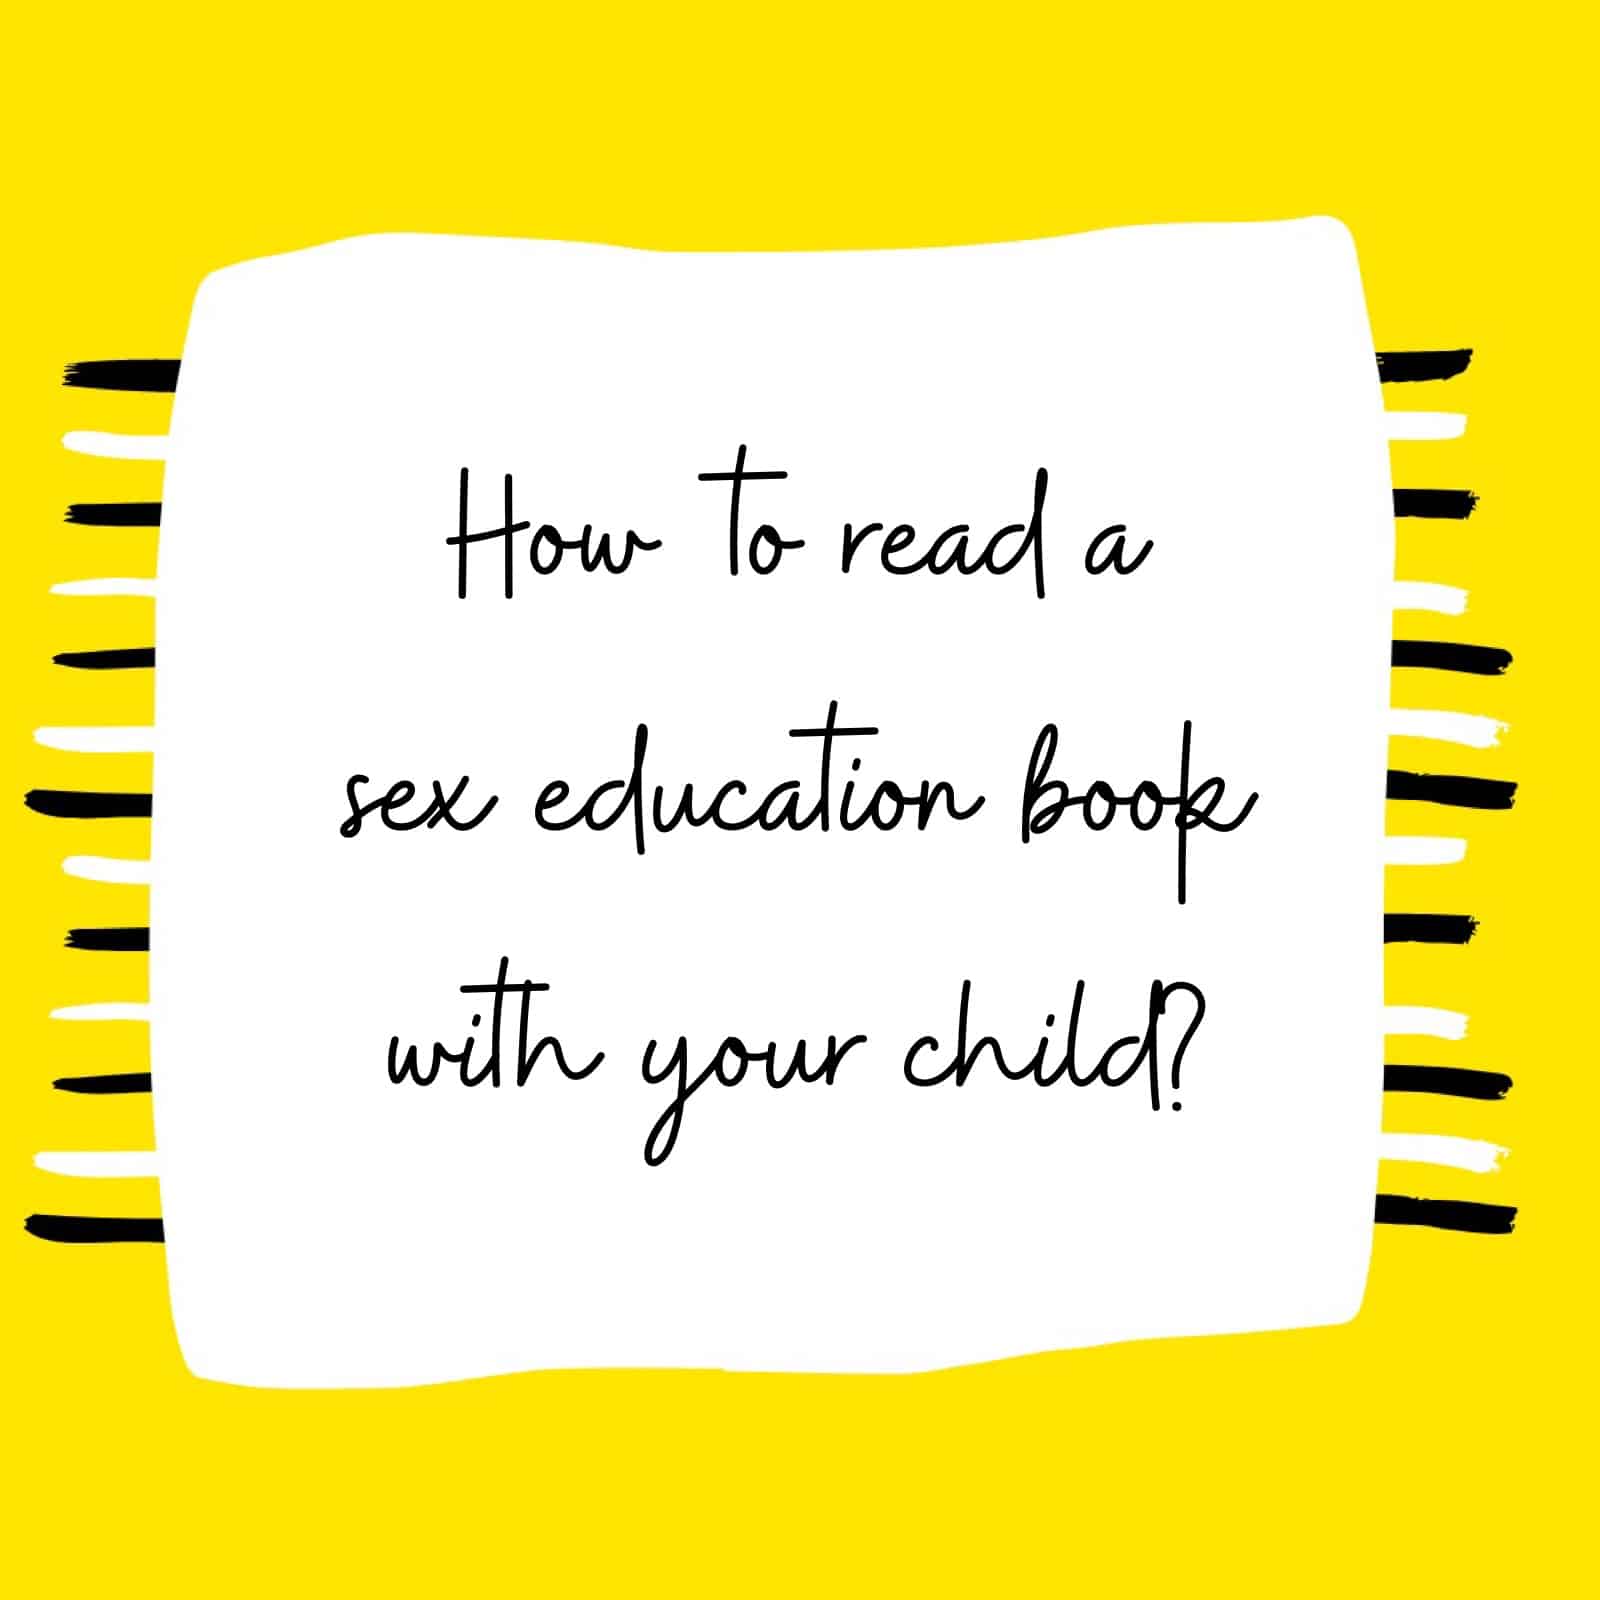 How to read a sex education book with your child